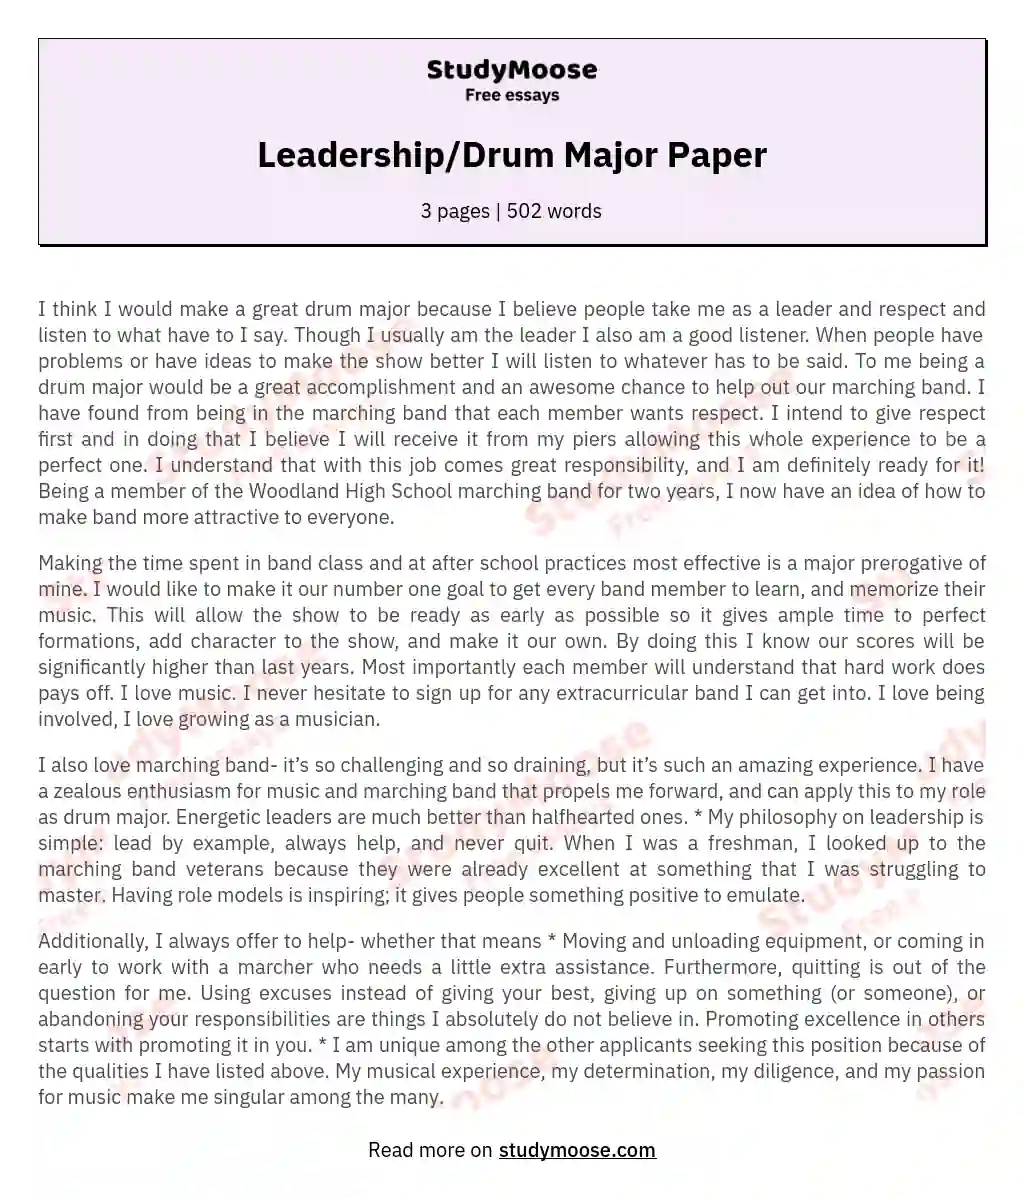 Elevating Excellence: My Vision as a Drum Major essay